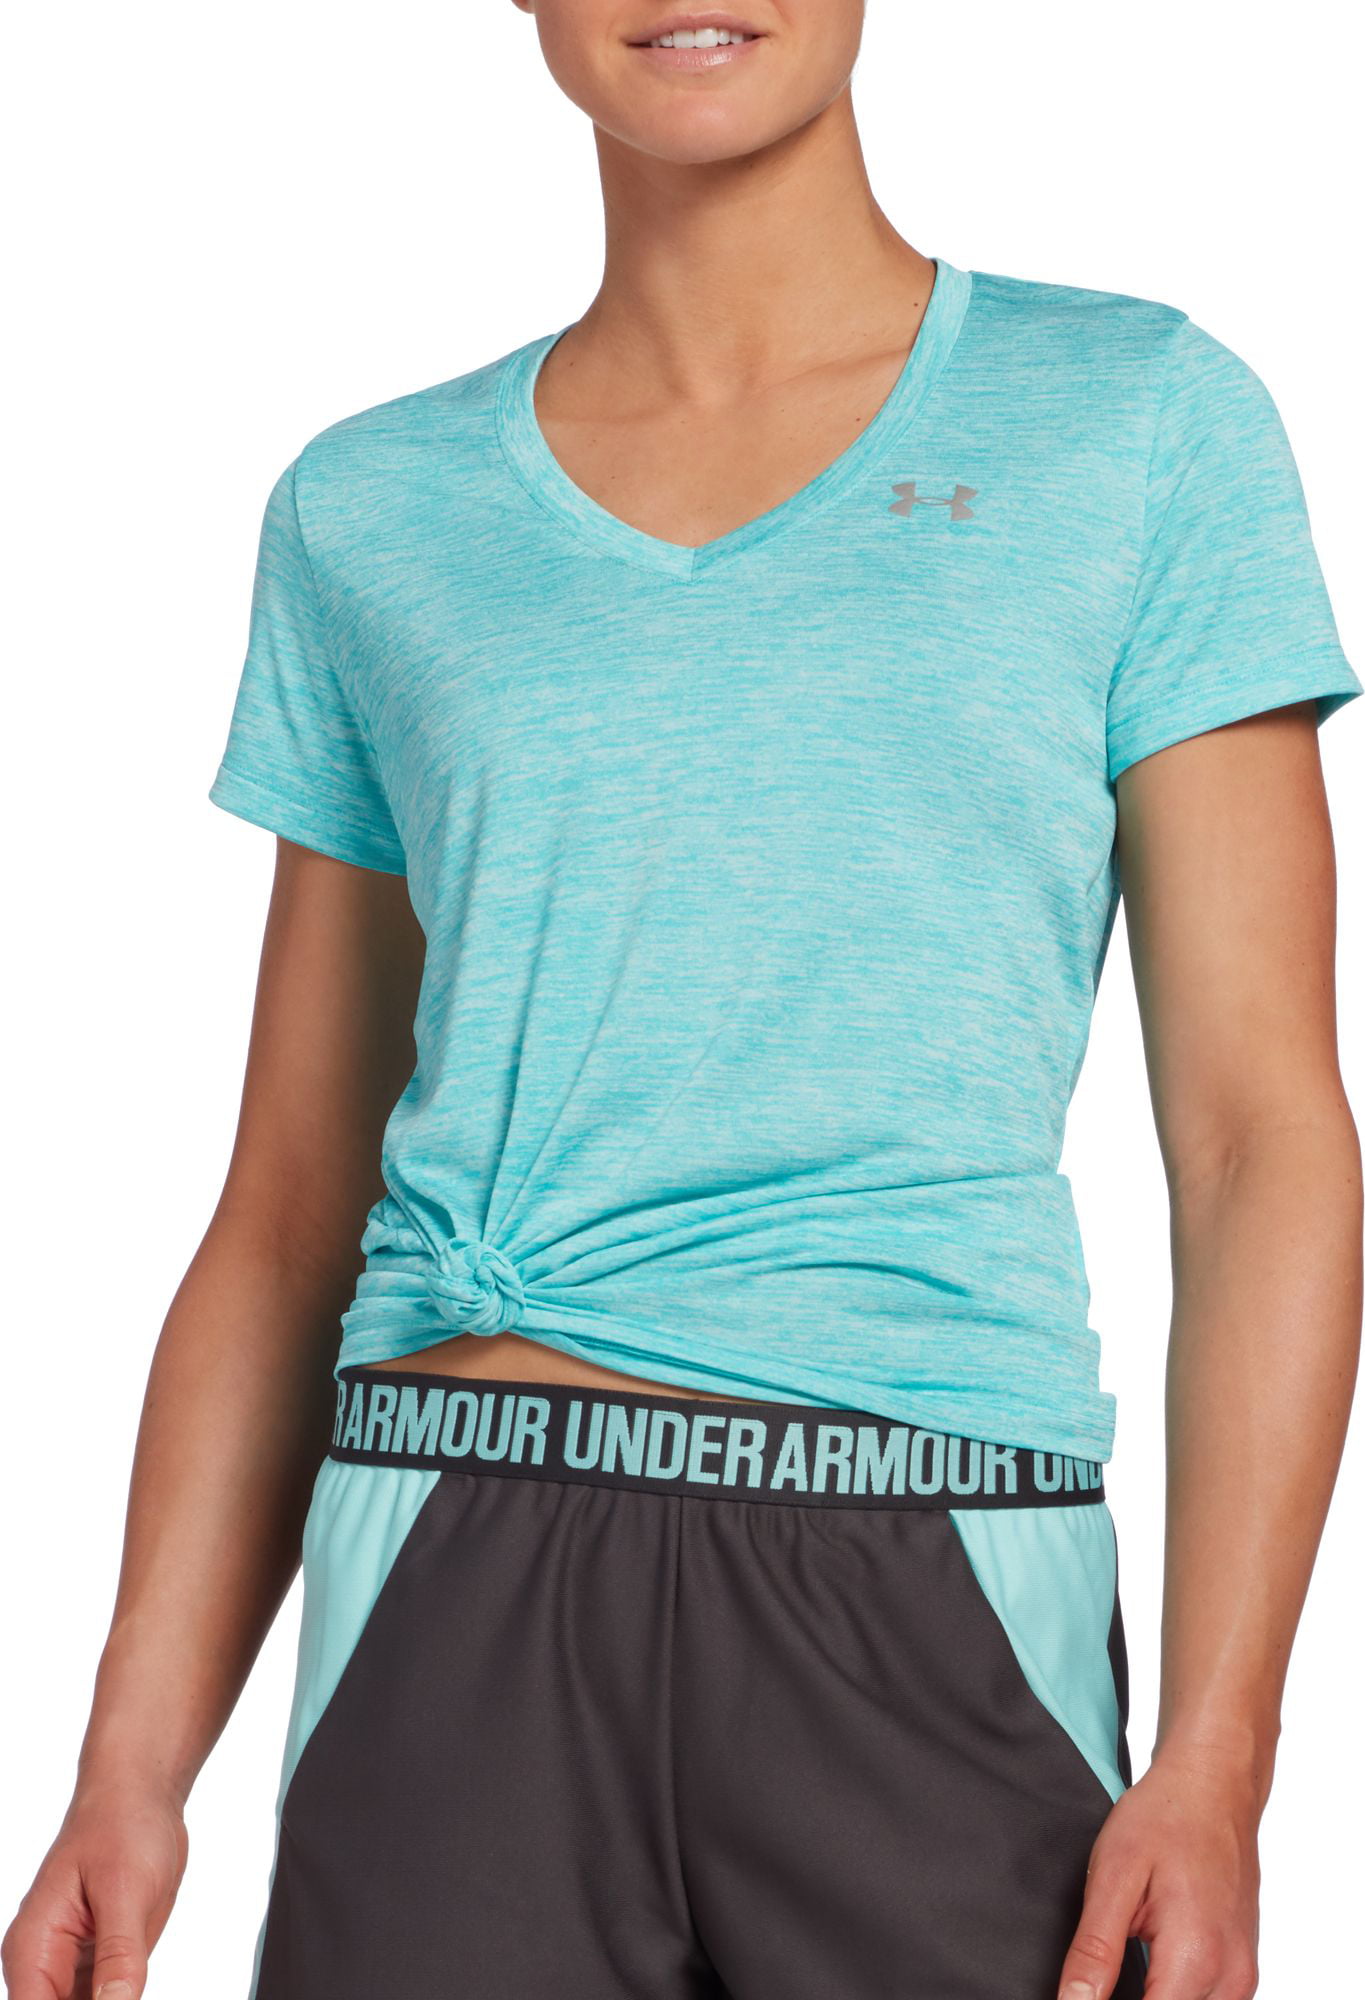 mout Zwitsers In zicht Under Armour Women's Twisted Tech V-Neck Shirt - Walmart.com